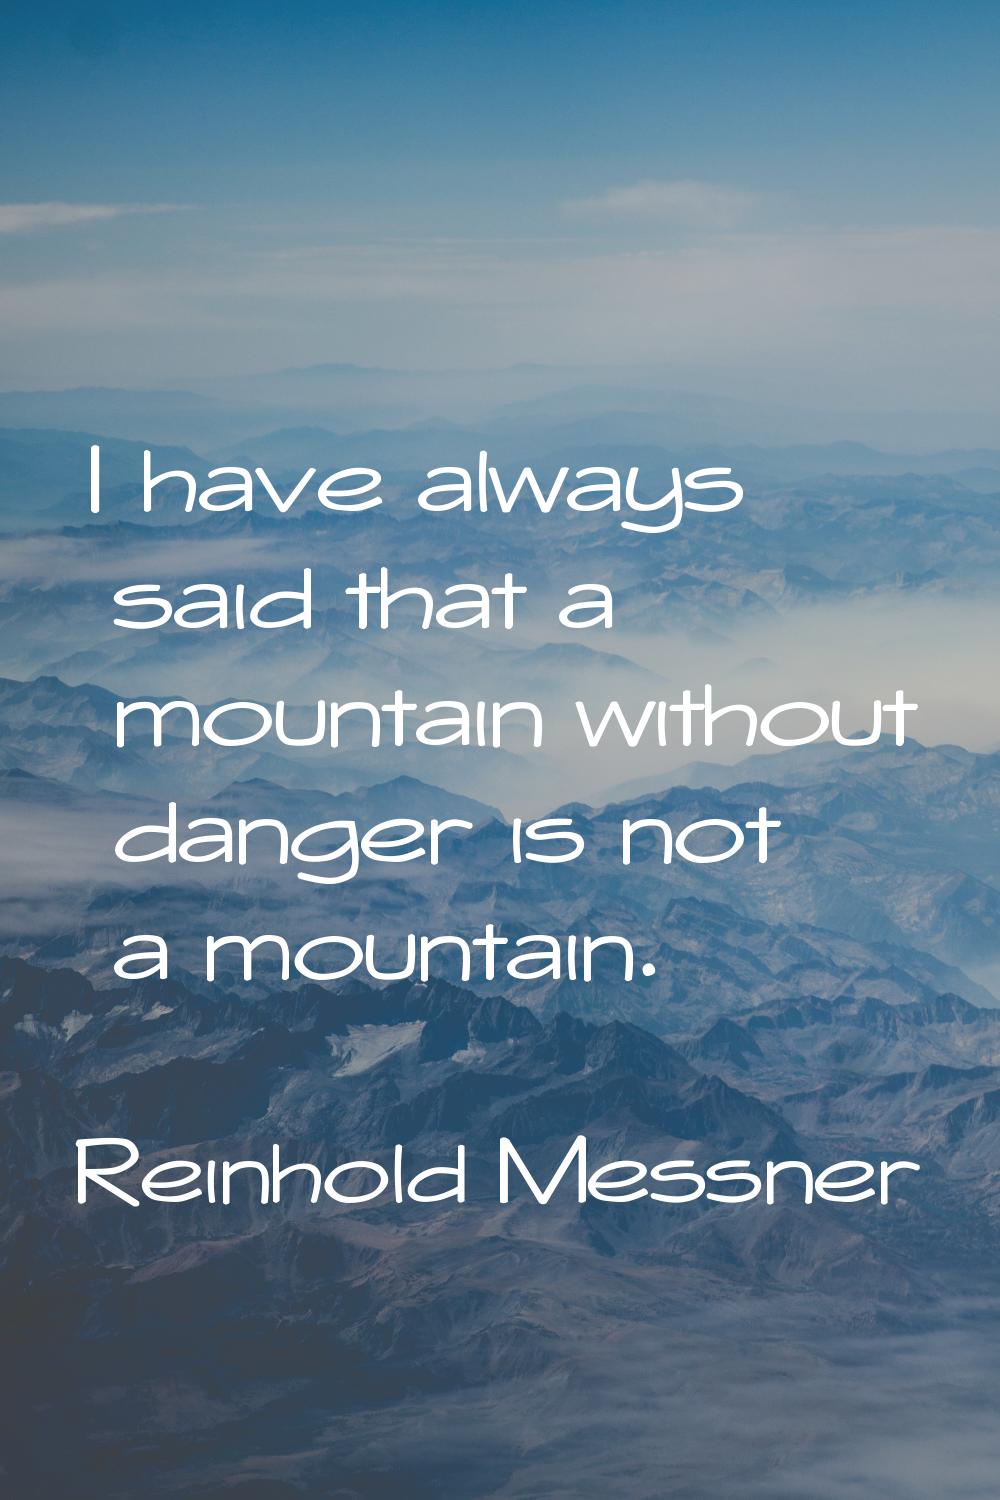 I have always said that a mountain without danger is not a mountain.